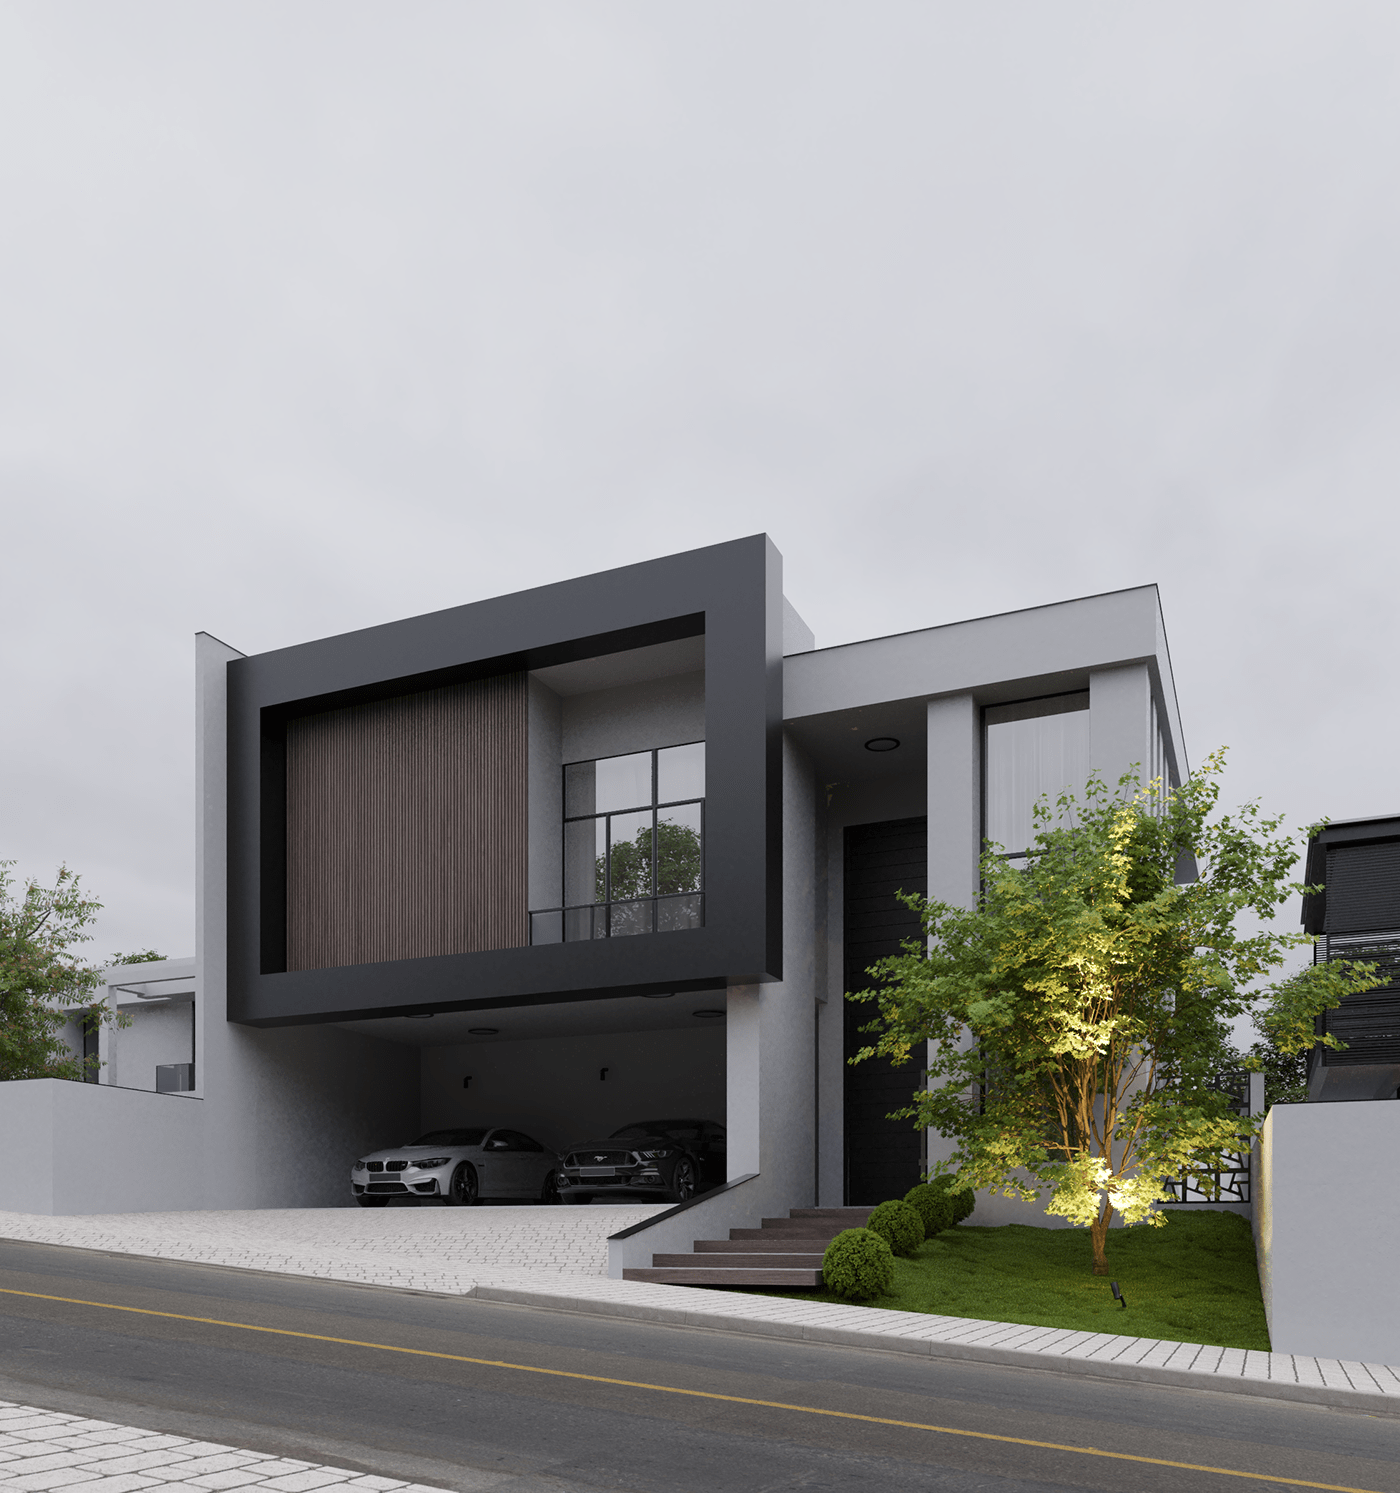 arquitectura Engenharia SketchUP vray vray render